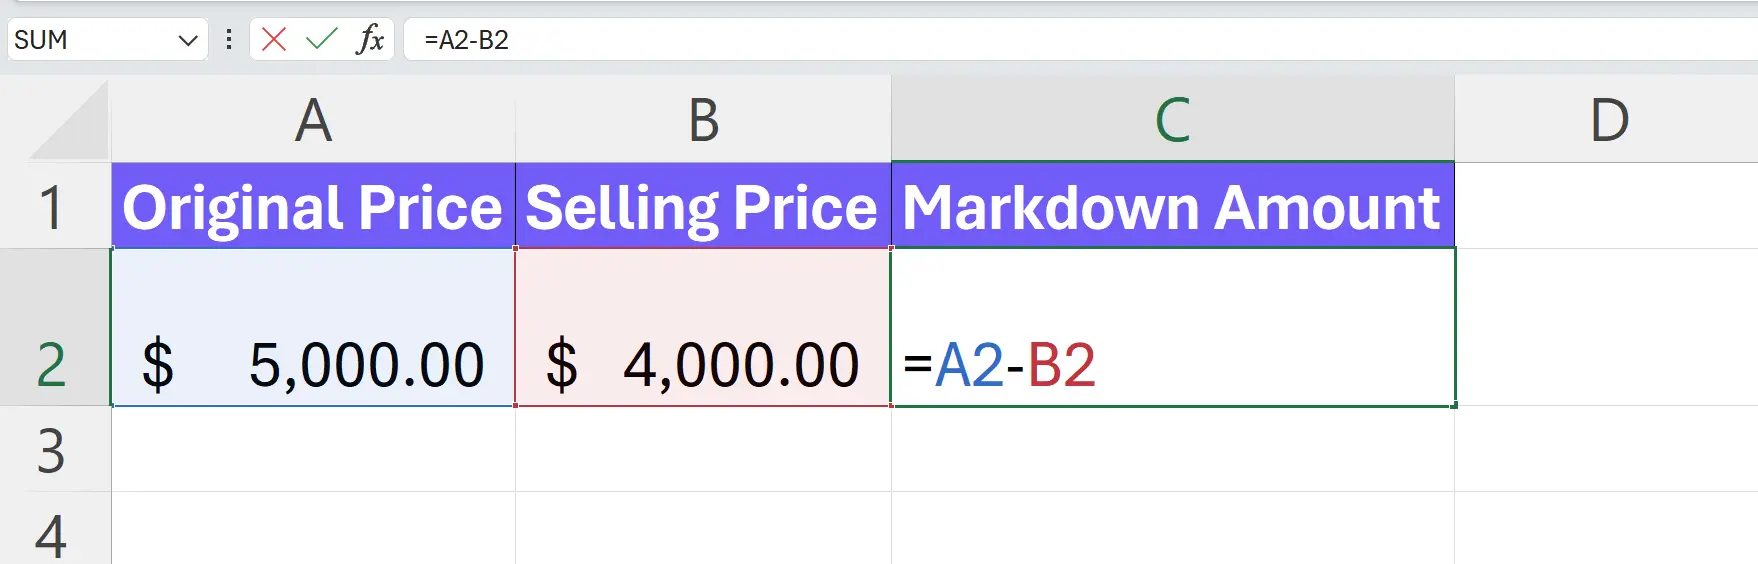 how to calculate markdown calculation in excel spreadsheet, screenshot by author